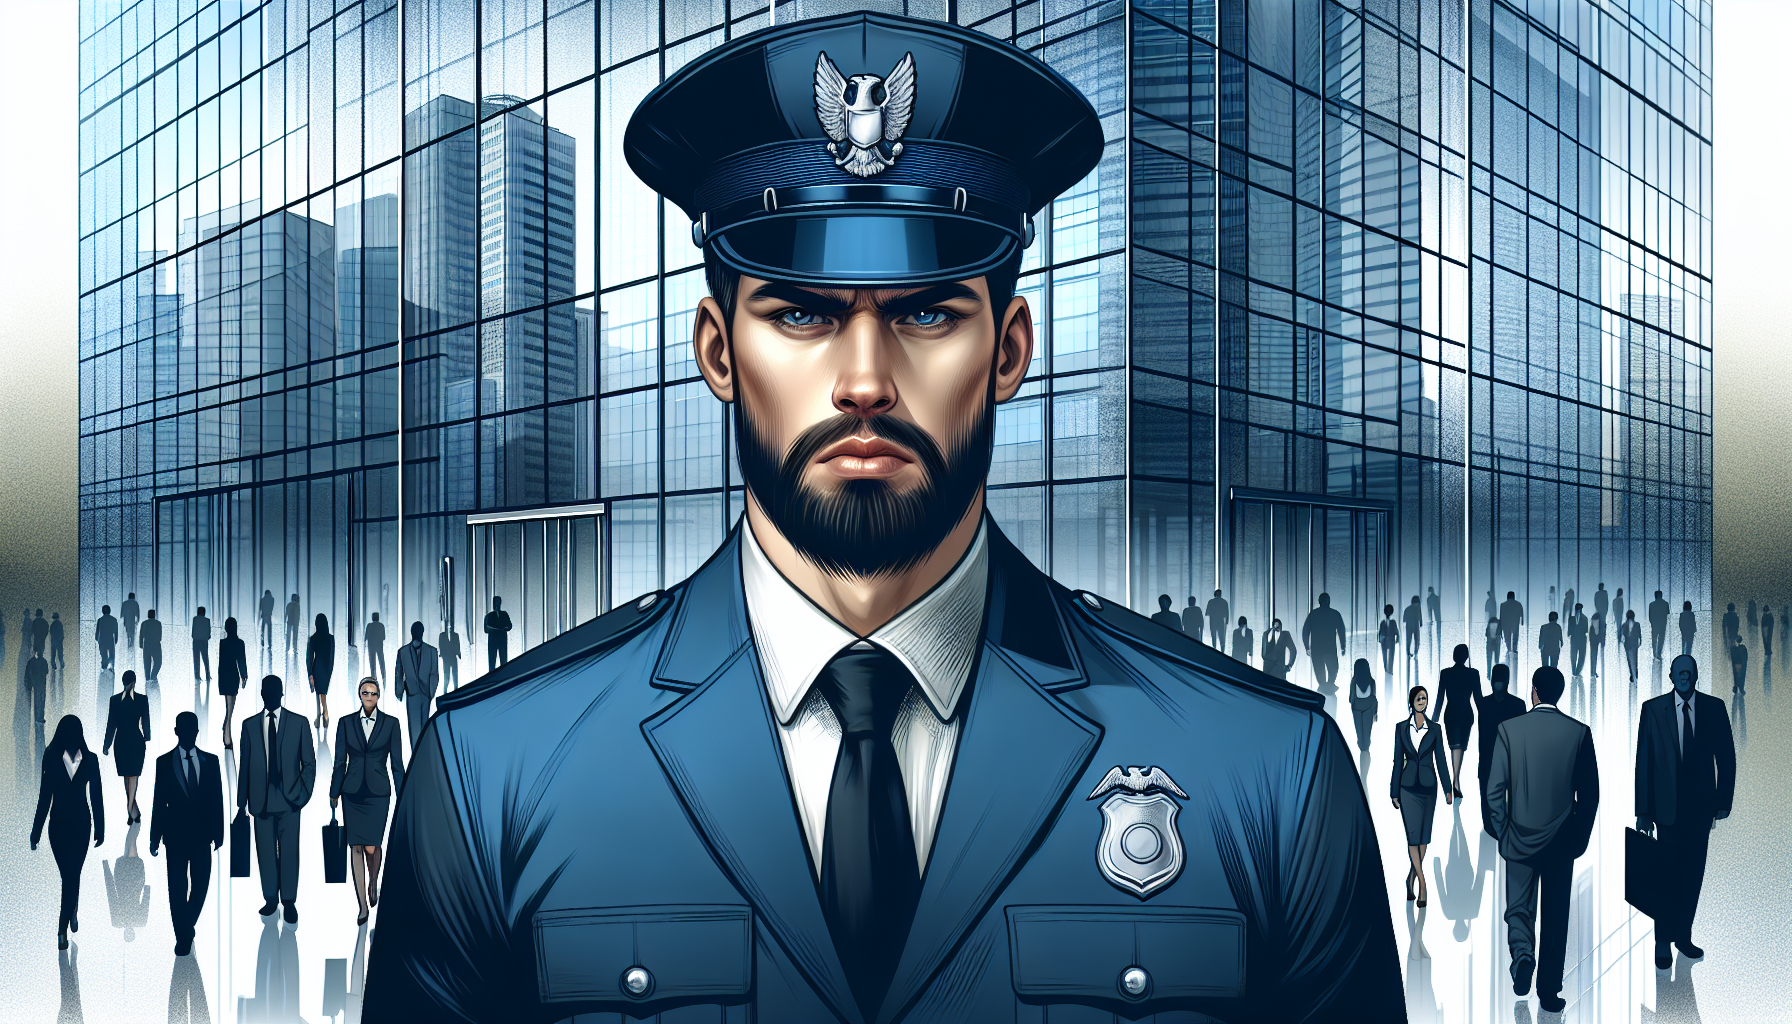 Illustration of security guard